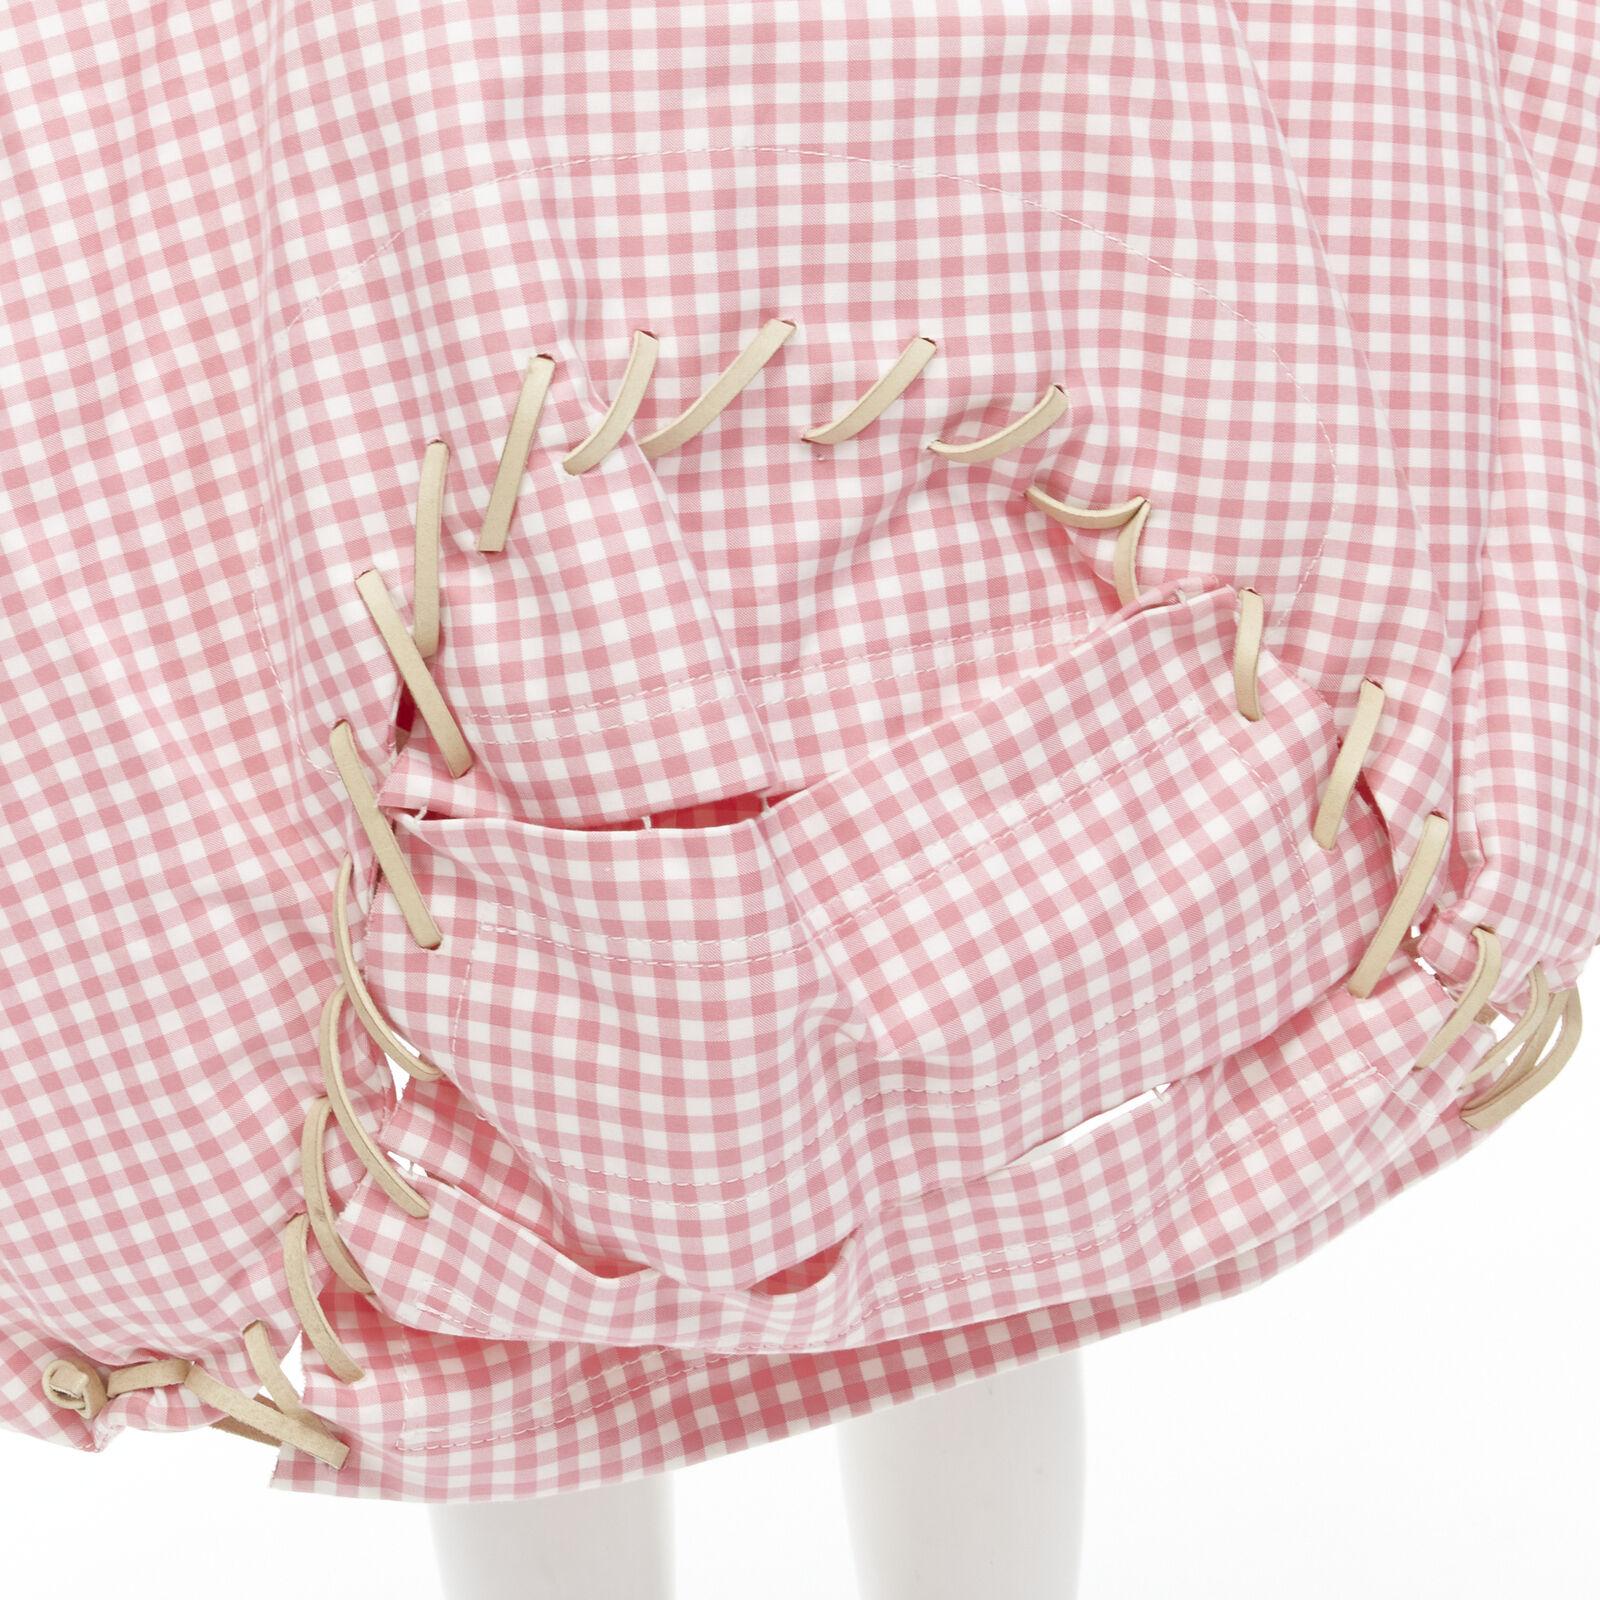 rare COMME DES GARCONS Vintage 2004 Runway pink checked  Punk balloon skirt
Reference: CRTI/A00709
Brand: Comme Des Garcons
Designer: Rei Kawakubo
Collection: 2004 - Runway
Material: Cotton
Color: Pink, White
Pattern: Checkered
Closure: Lace